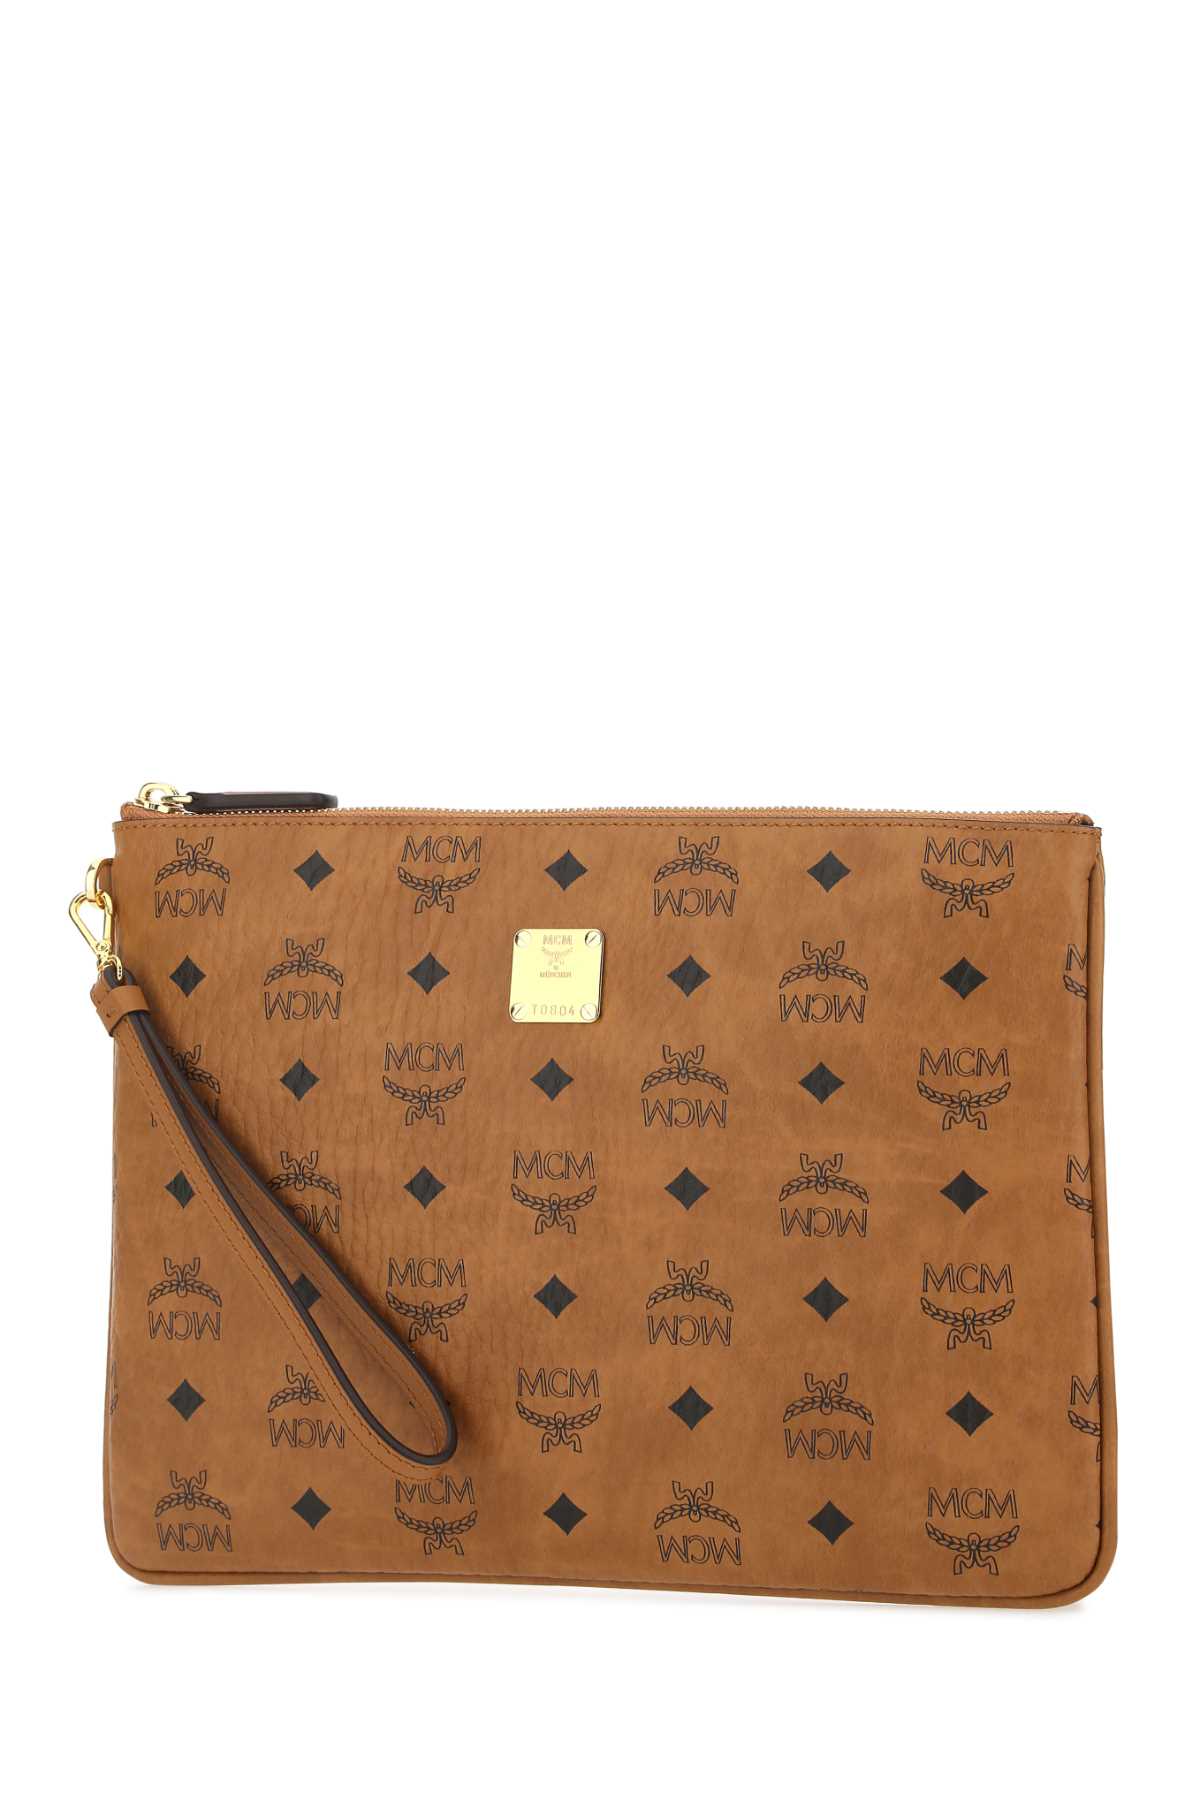 Mcm Printed Canvas Clutch In Co